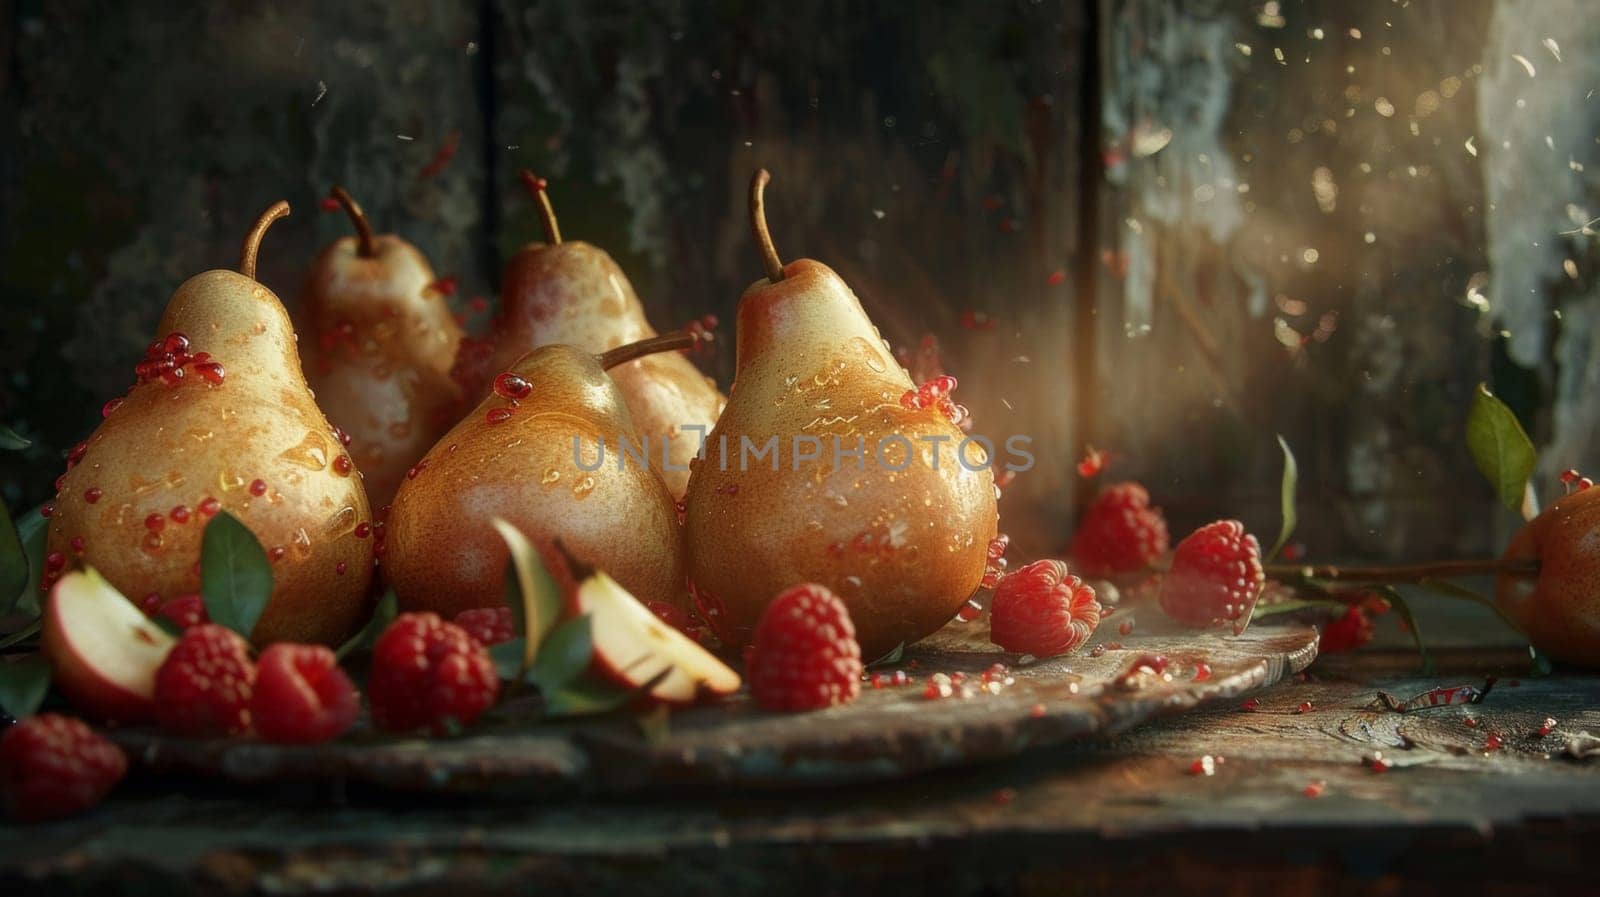 A bunch of pears and raspberries on a plate with water